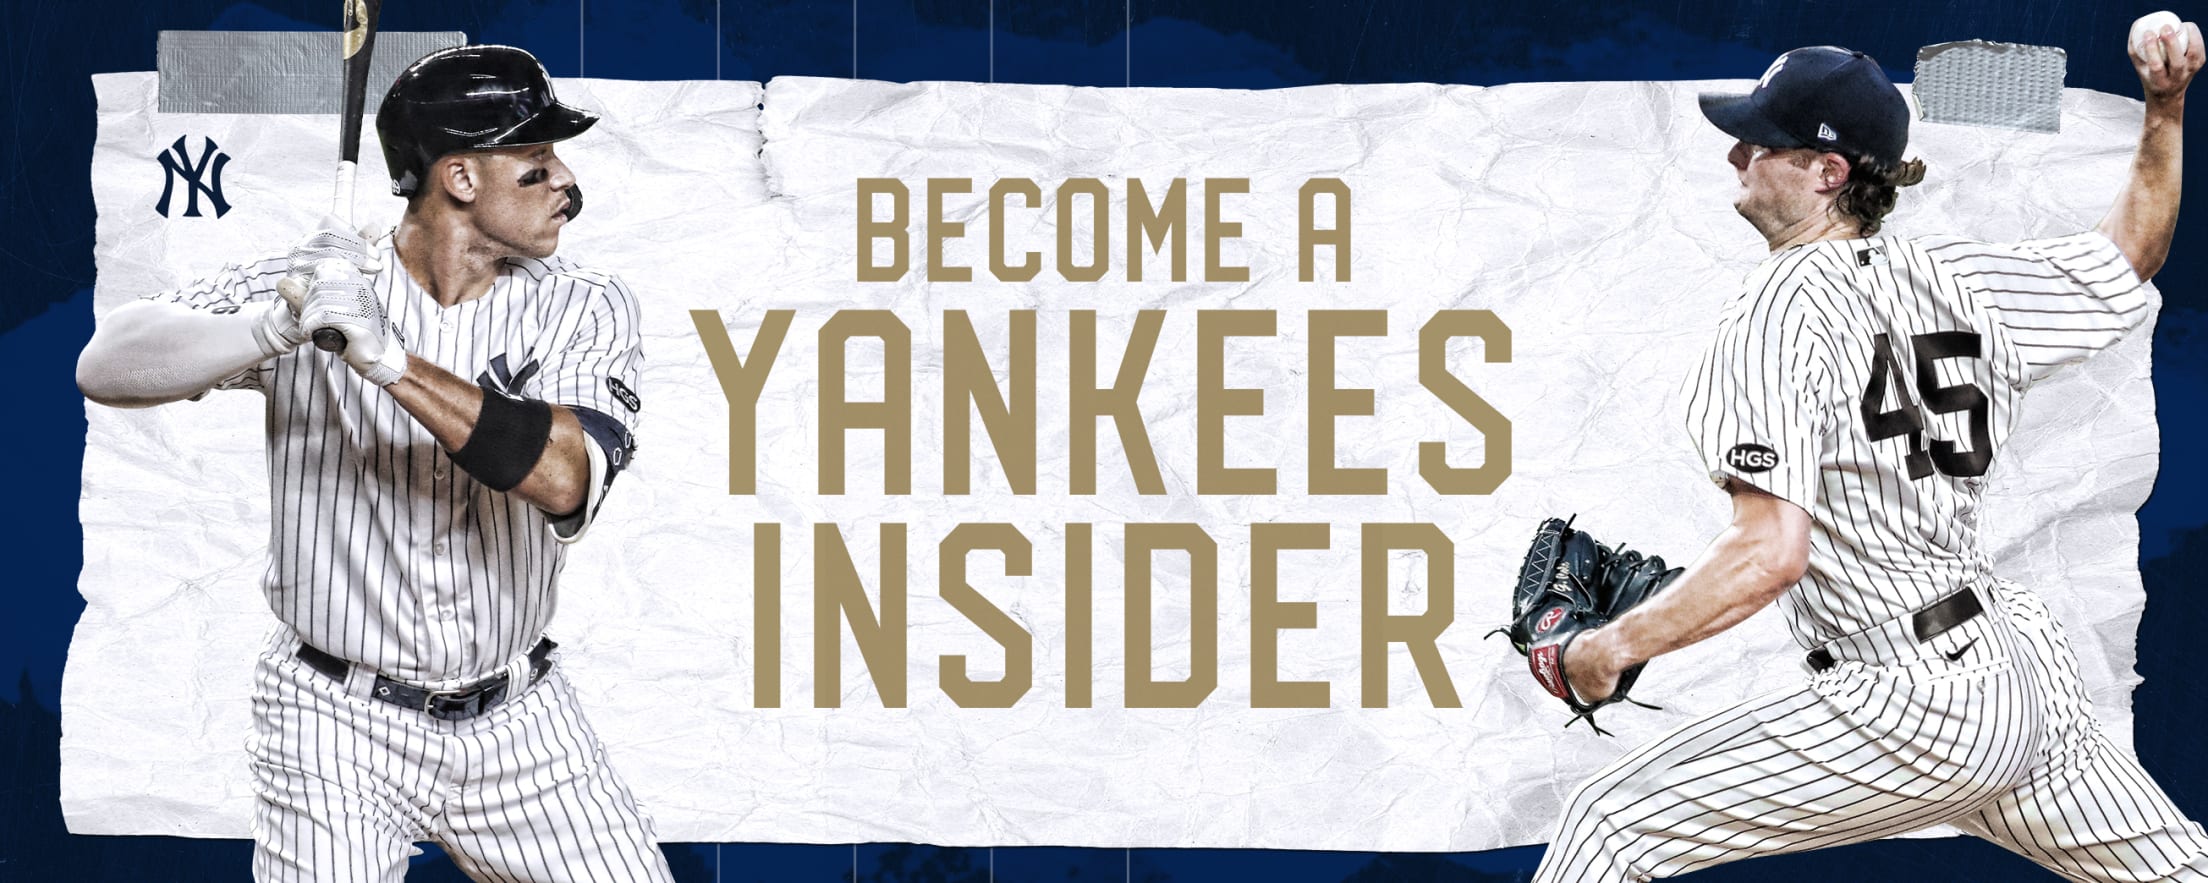 ny yankees store online